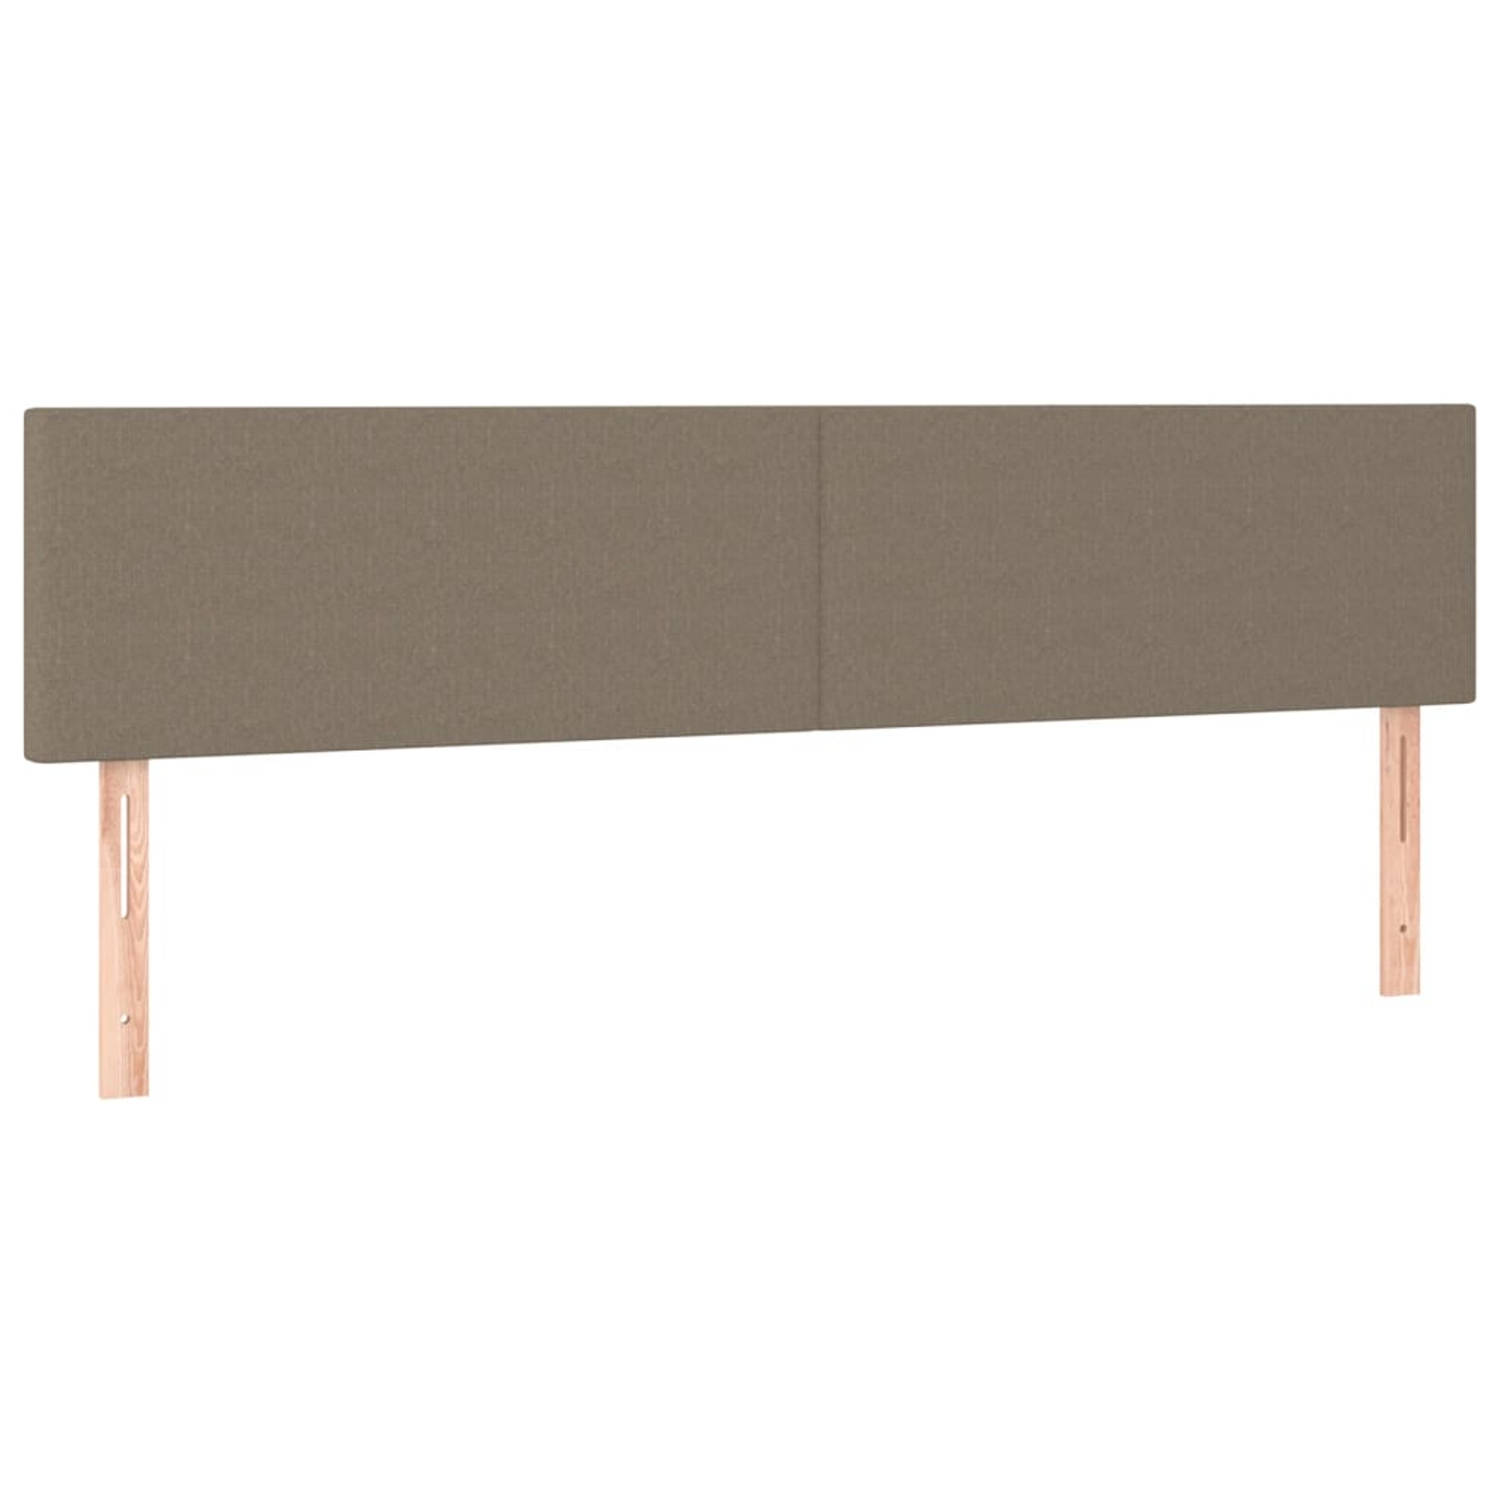 The Living Store Hoofdeind - Classic - Bedombouw Accessoires - 160 x 5 x 78/88 cm - Taupe